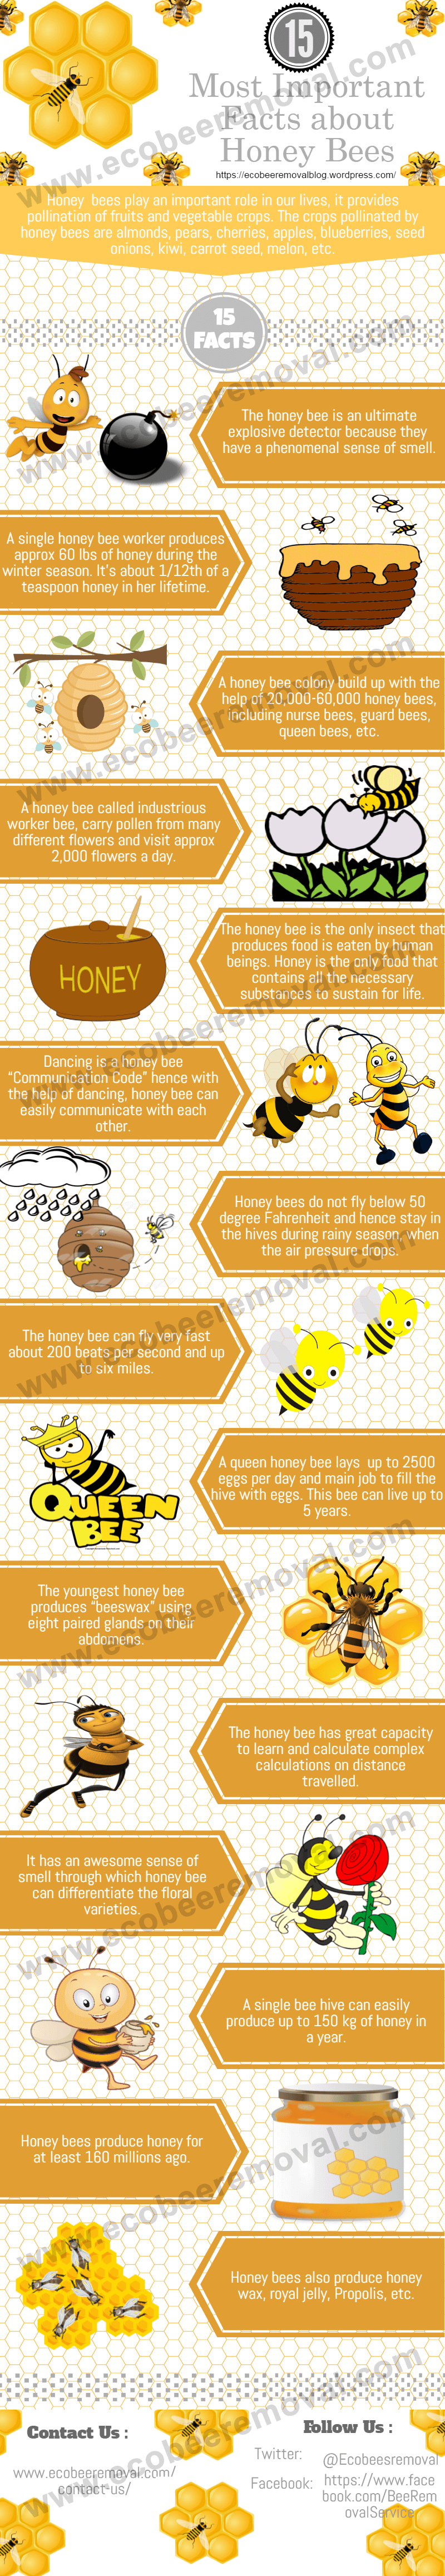 15 Most Important Facts about Honey Bees [Infographic]